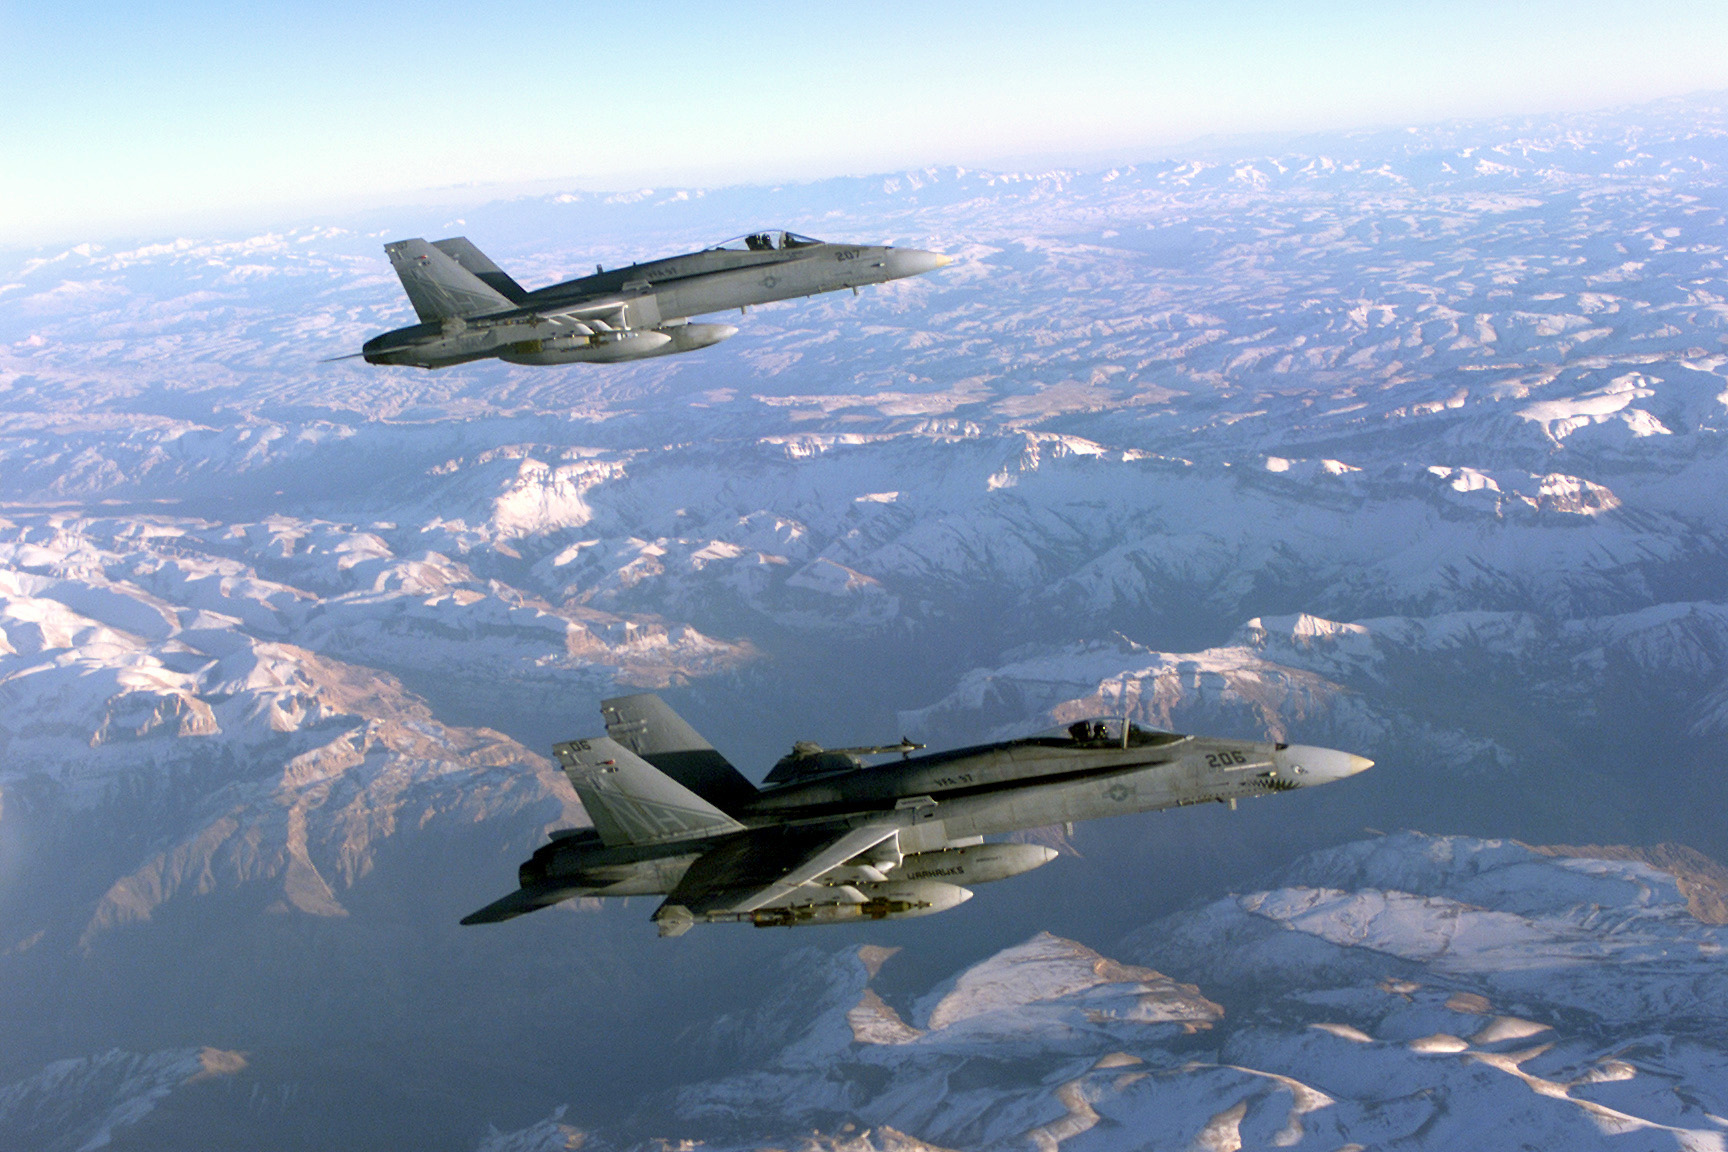 Two Navy F/A-18 Hornets patrol the skies over Afghanistan in support of Operation ENDURING FREEDOM. Both carry external fuel tanks and are armed with Paveway II laser guided GBU-16 1,000-pound bombs and AIM-9 Sidewinder missiles. In response to the terrorist attacks on September 11, 2001 at the New York World Trade Center and the Pentagon, President George W. Bush initiated Operation ENDURING FREEDOM in support of the Global War on Terrorism (GWOT), fighting terrorism abroad.